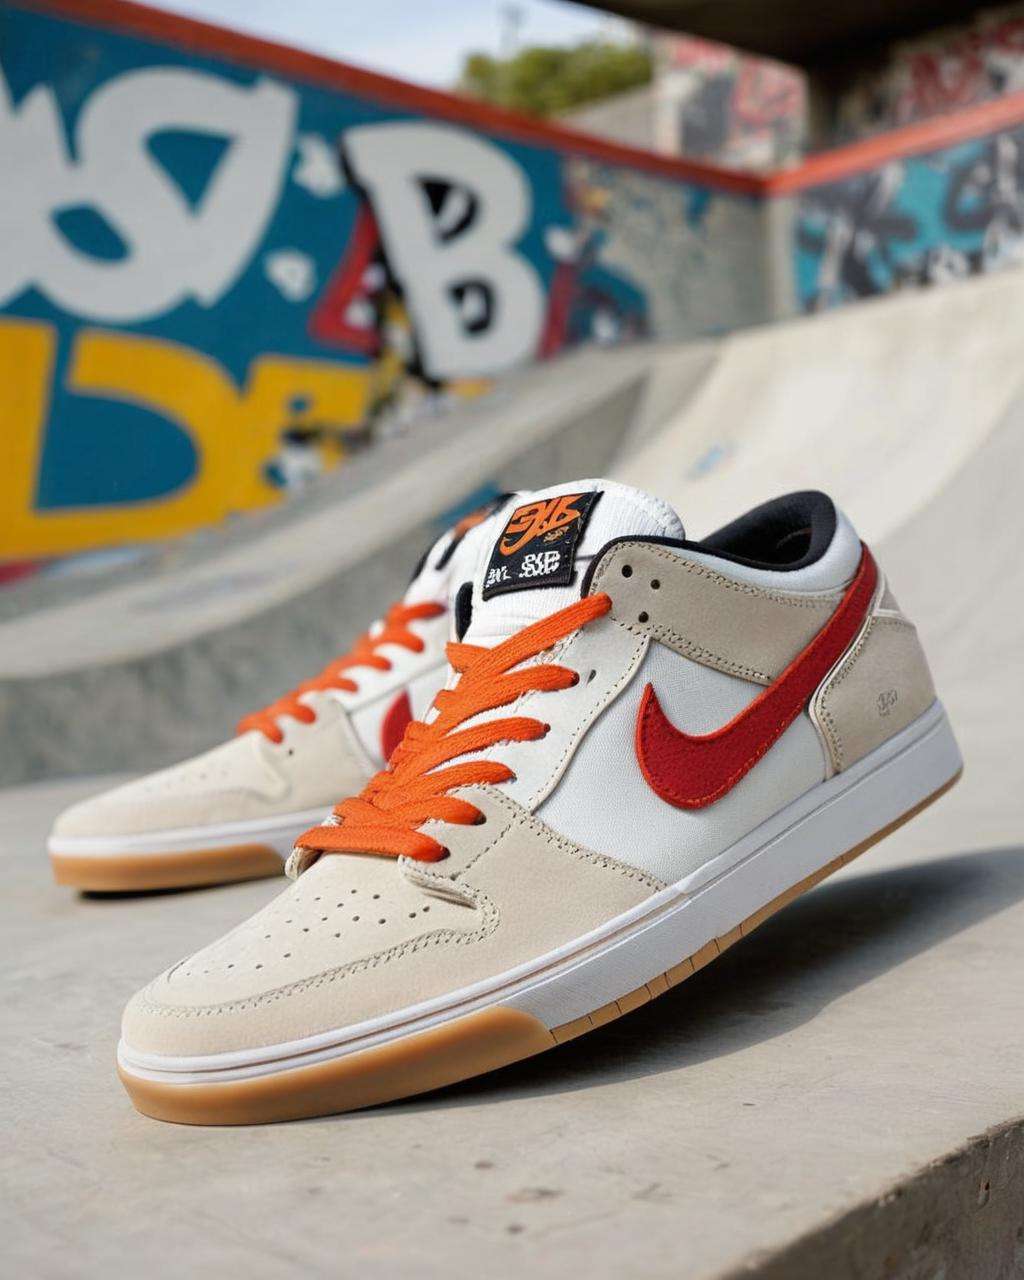 Nike SB skateboarding shoes, urban attitude:0.7, photographed in a skate park environment, showcasing their durable construction and grip, capturing the rebellious spirit of skate culture, action shot:0.9.<lora:shoes:1.0>